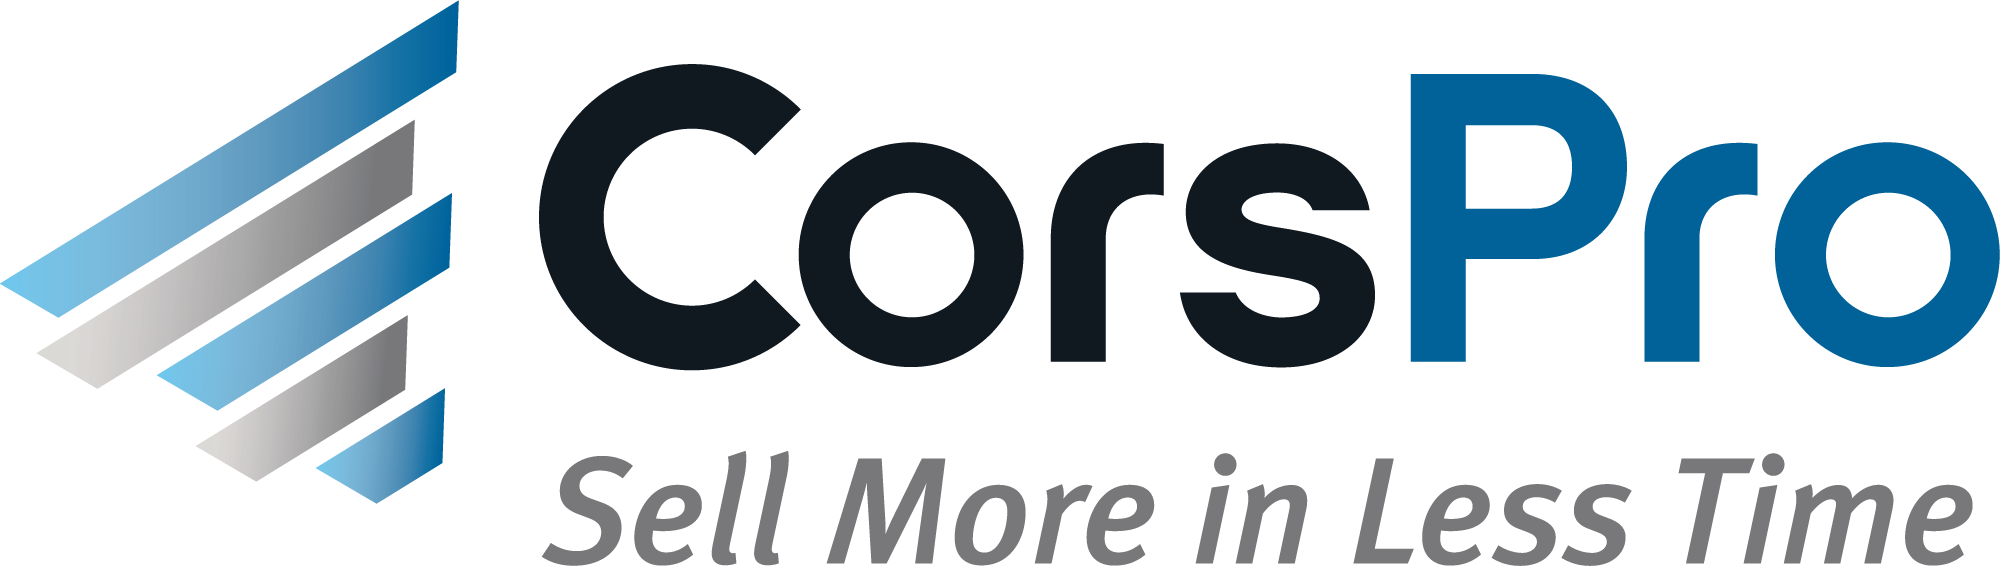 CorsPro automates the sales process to help you sell more in less time.